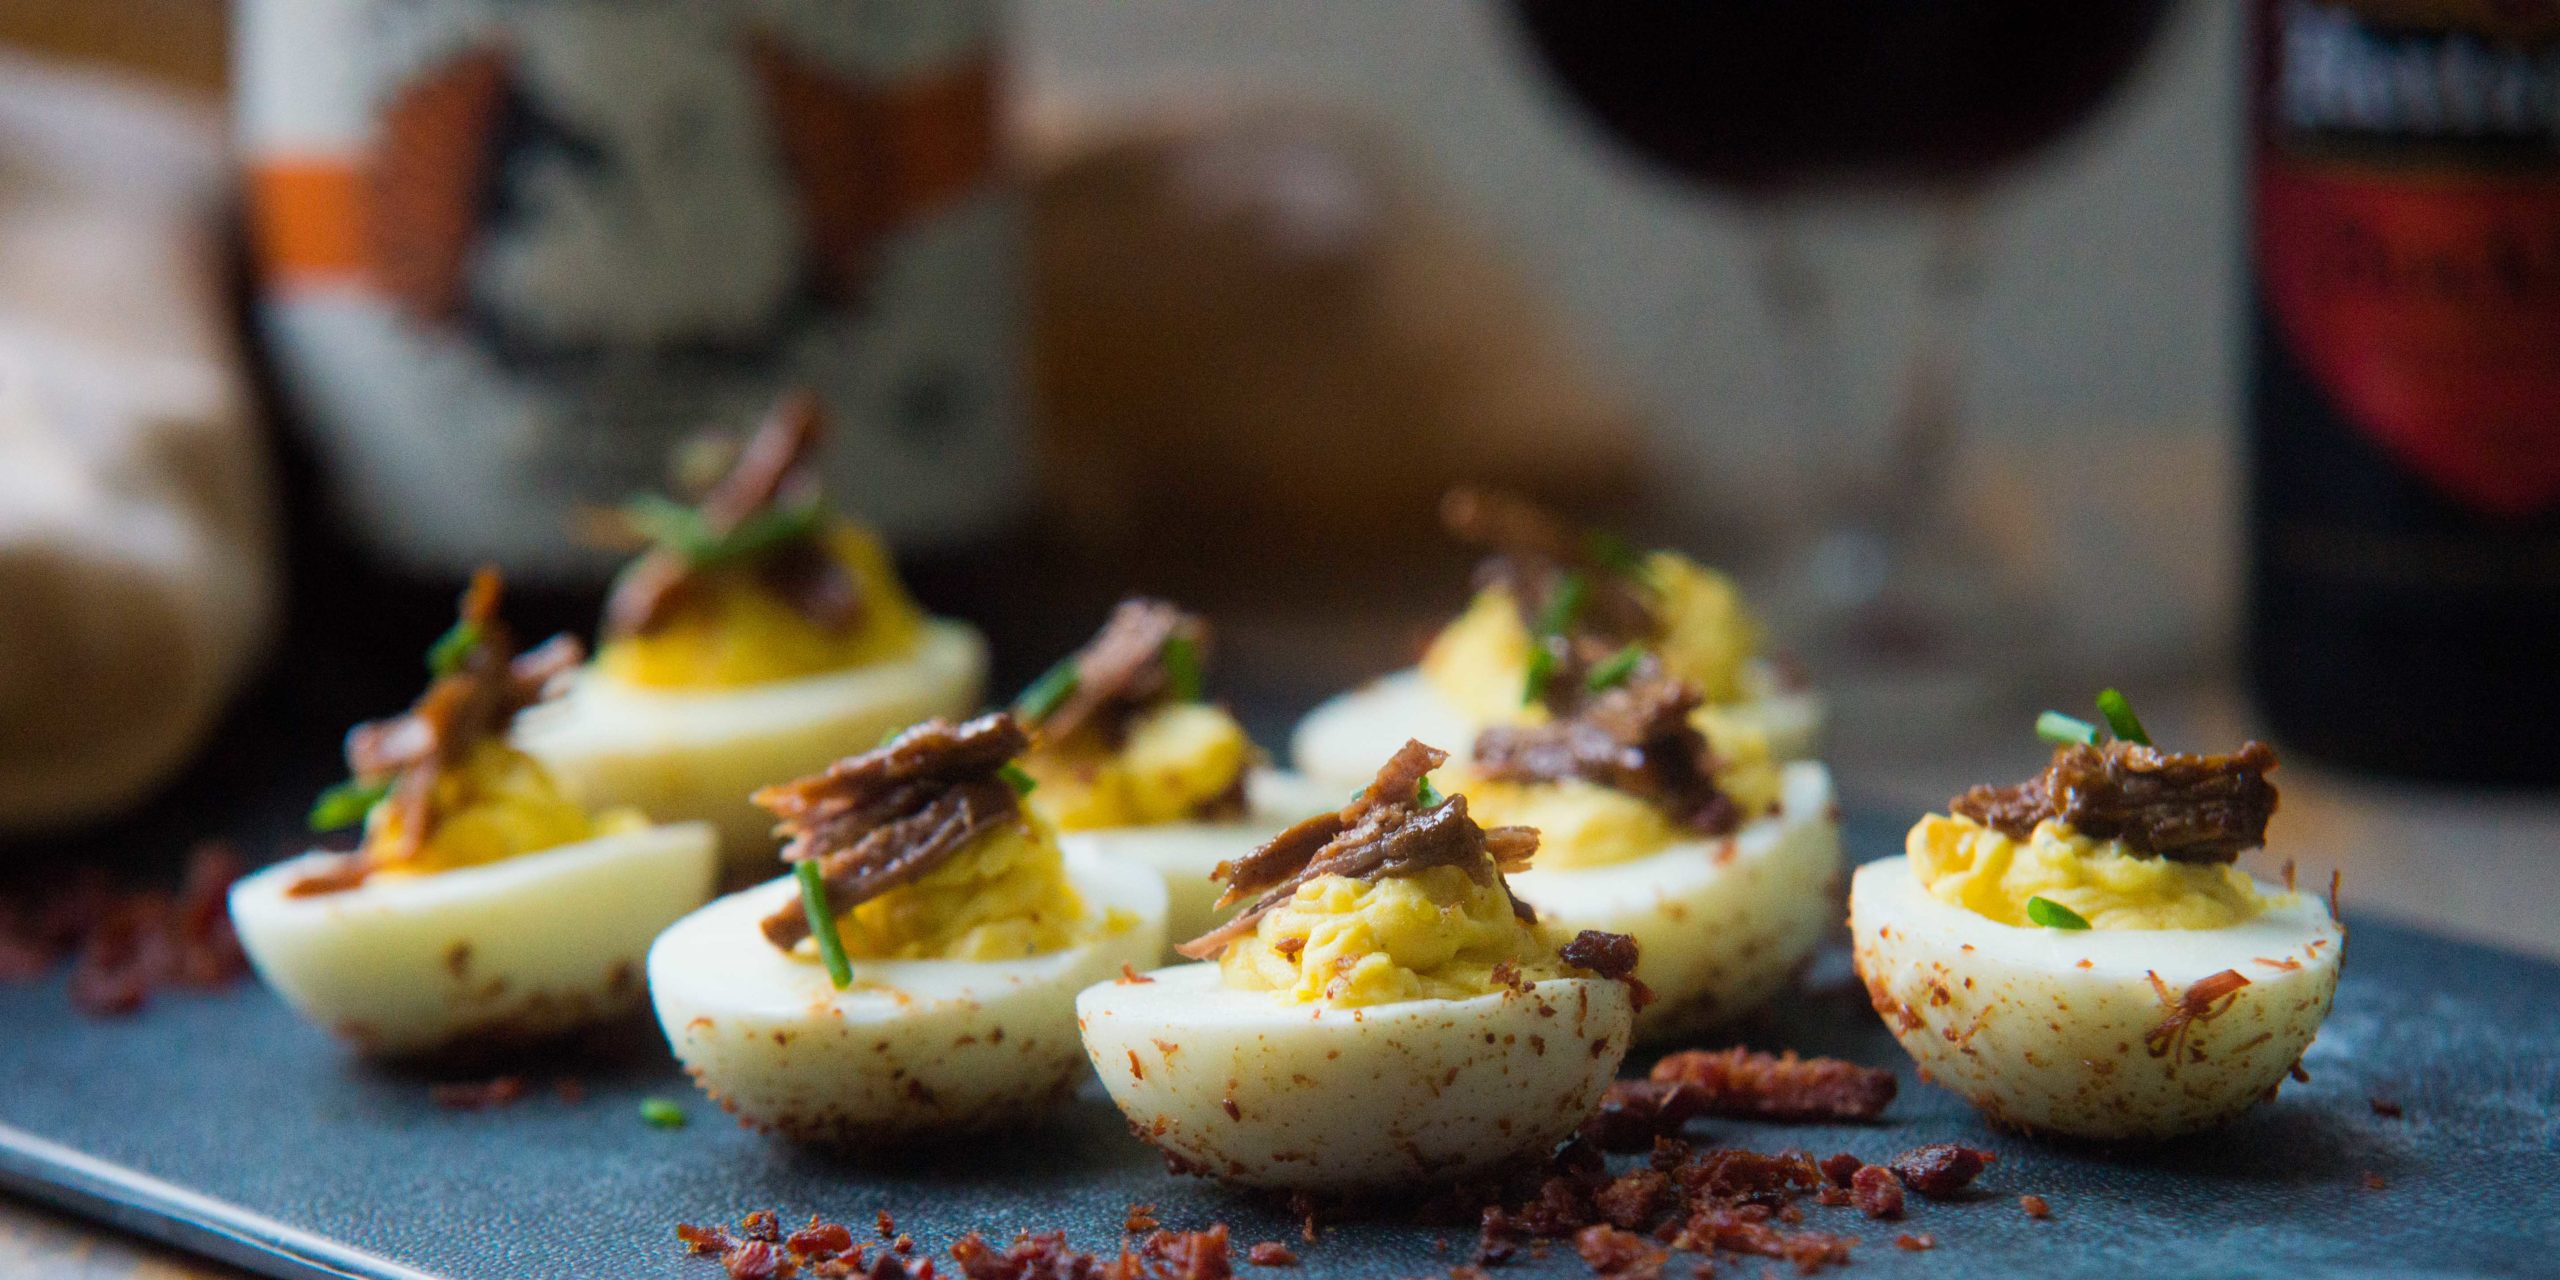 Jord Althuizen, BBQ Feast on Fire, Deviled eggs